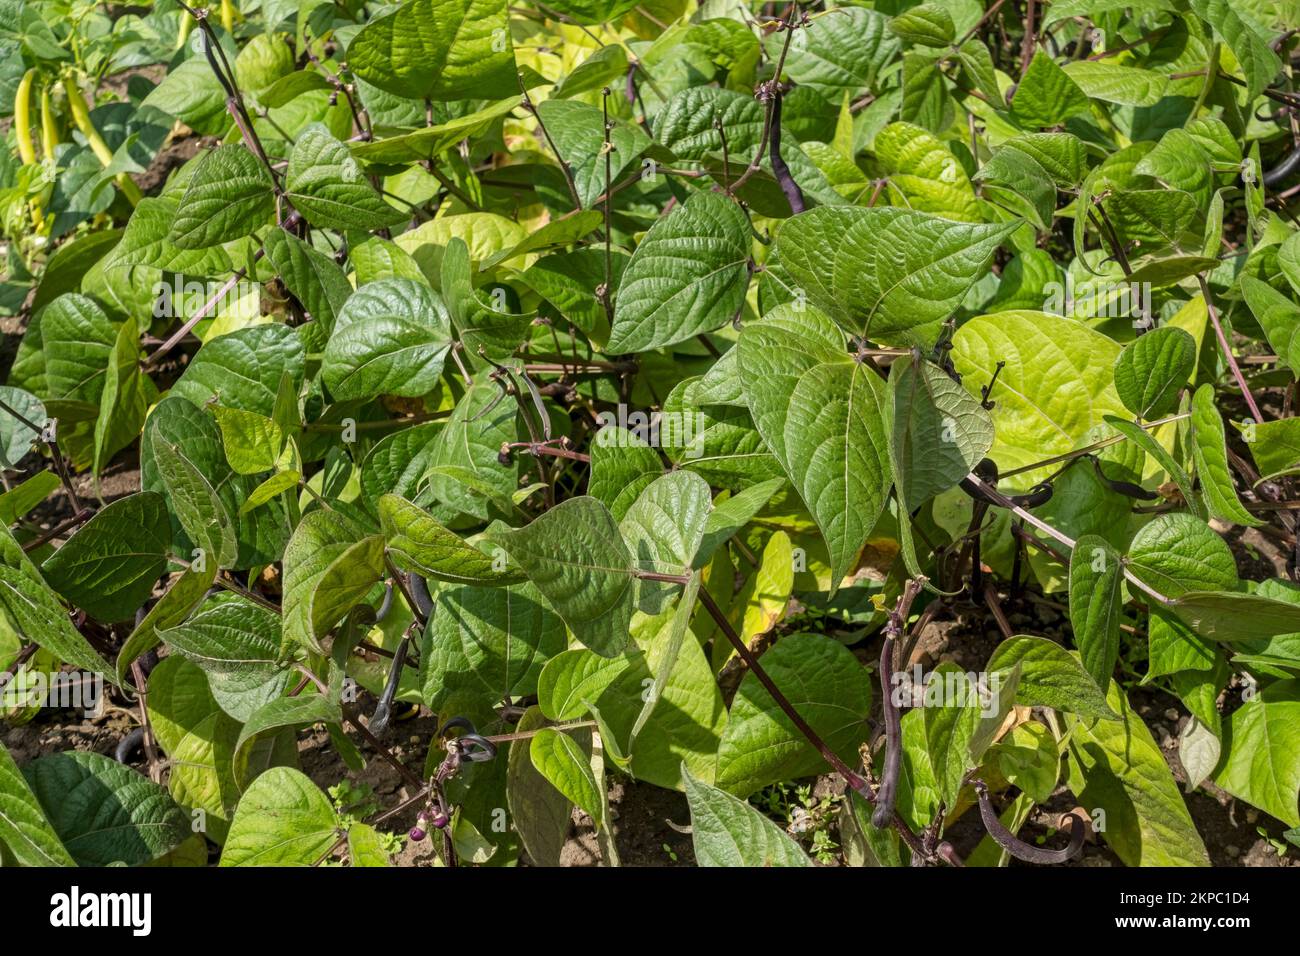 Close up of dwarf French bean plants plant 'Purple Teepee' growing in a vegetable garden in summer England UK United Kingdom GB Great Britain Stock Photo